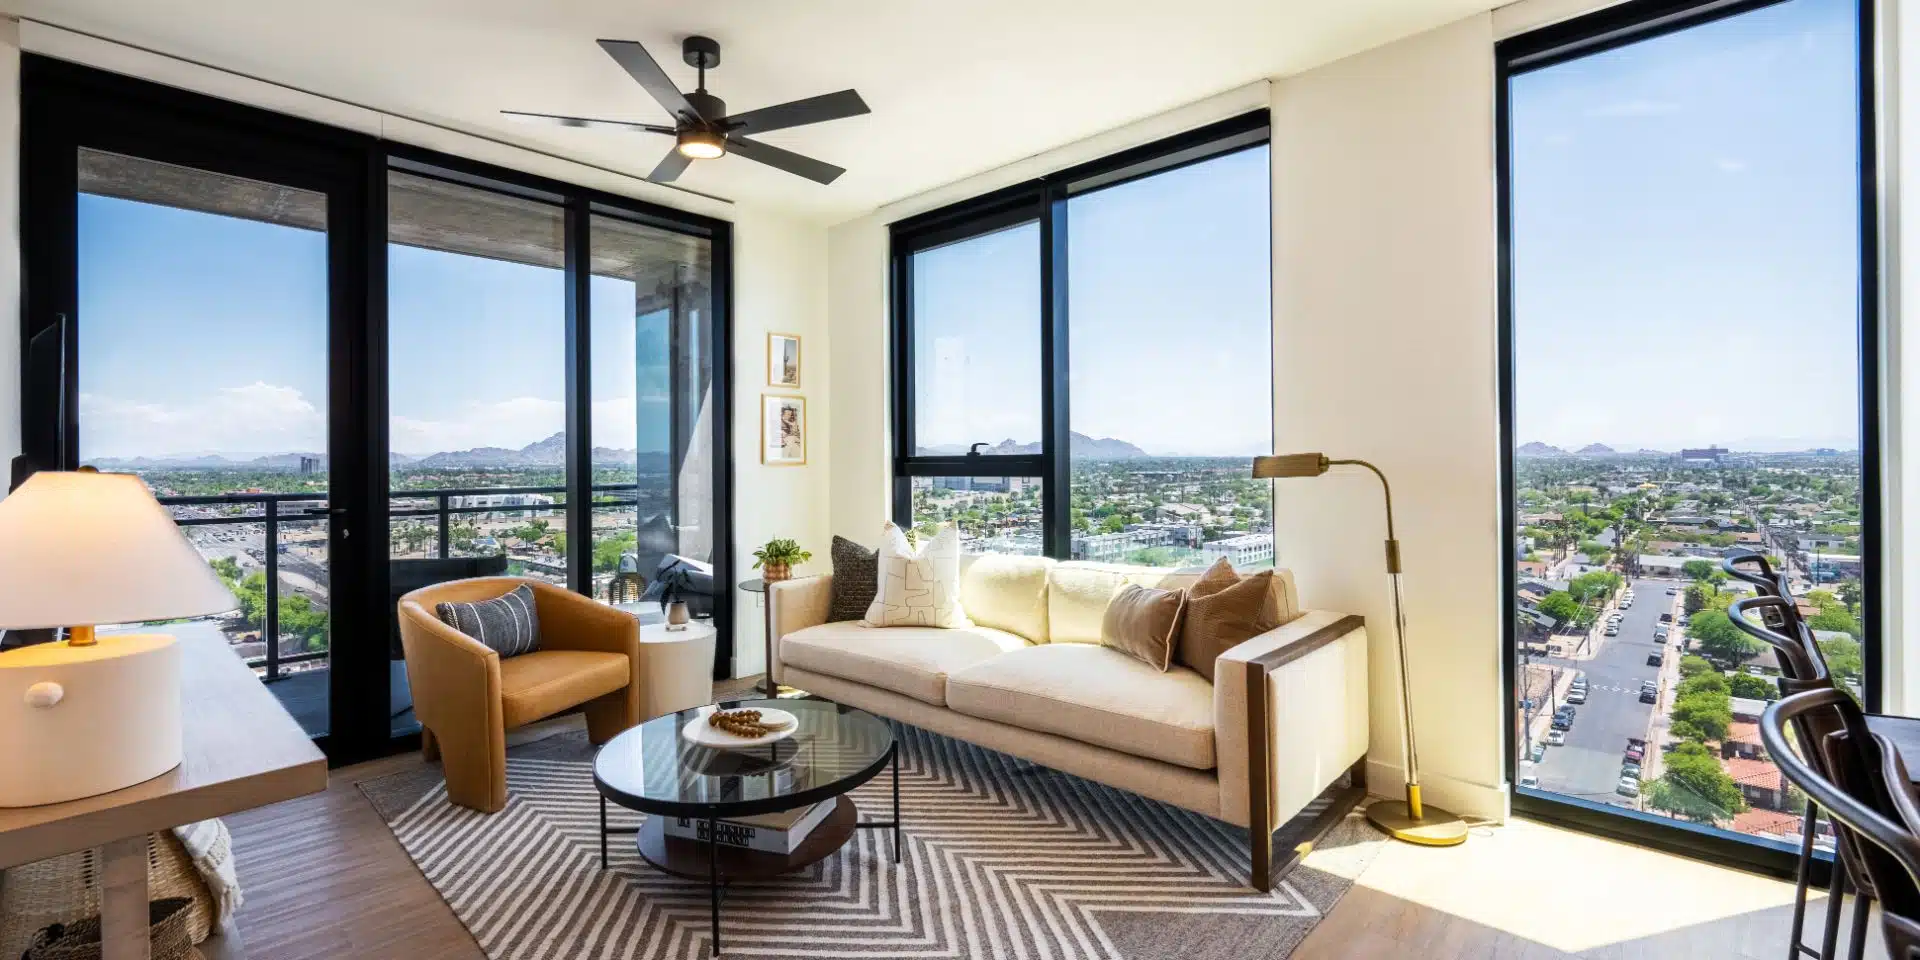 Living room at Skye on 6th, a new apartment building in downtown Phoenix